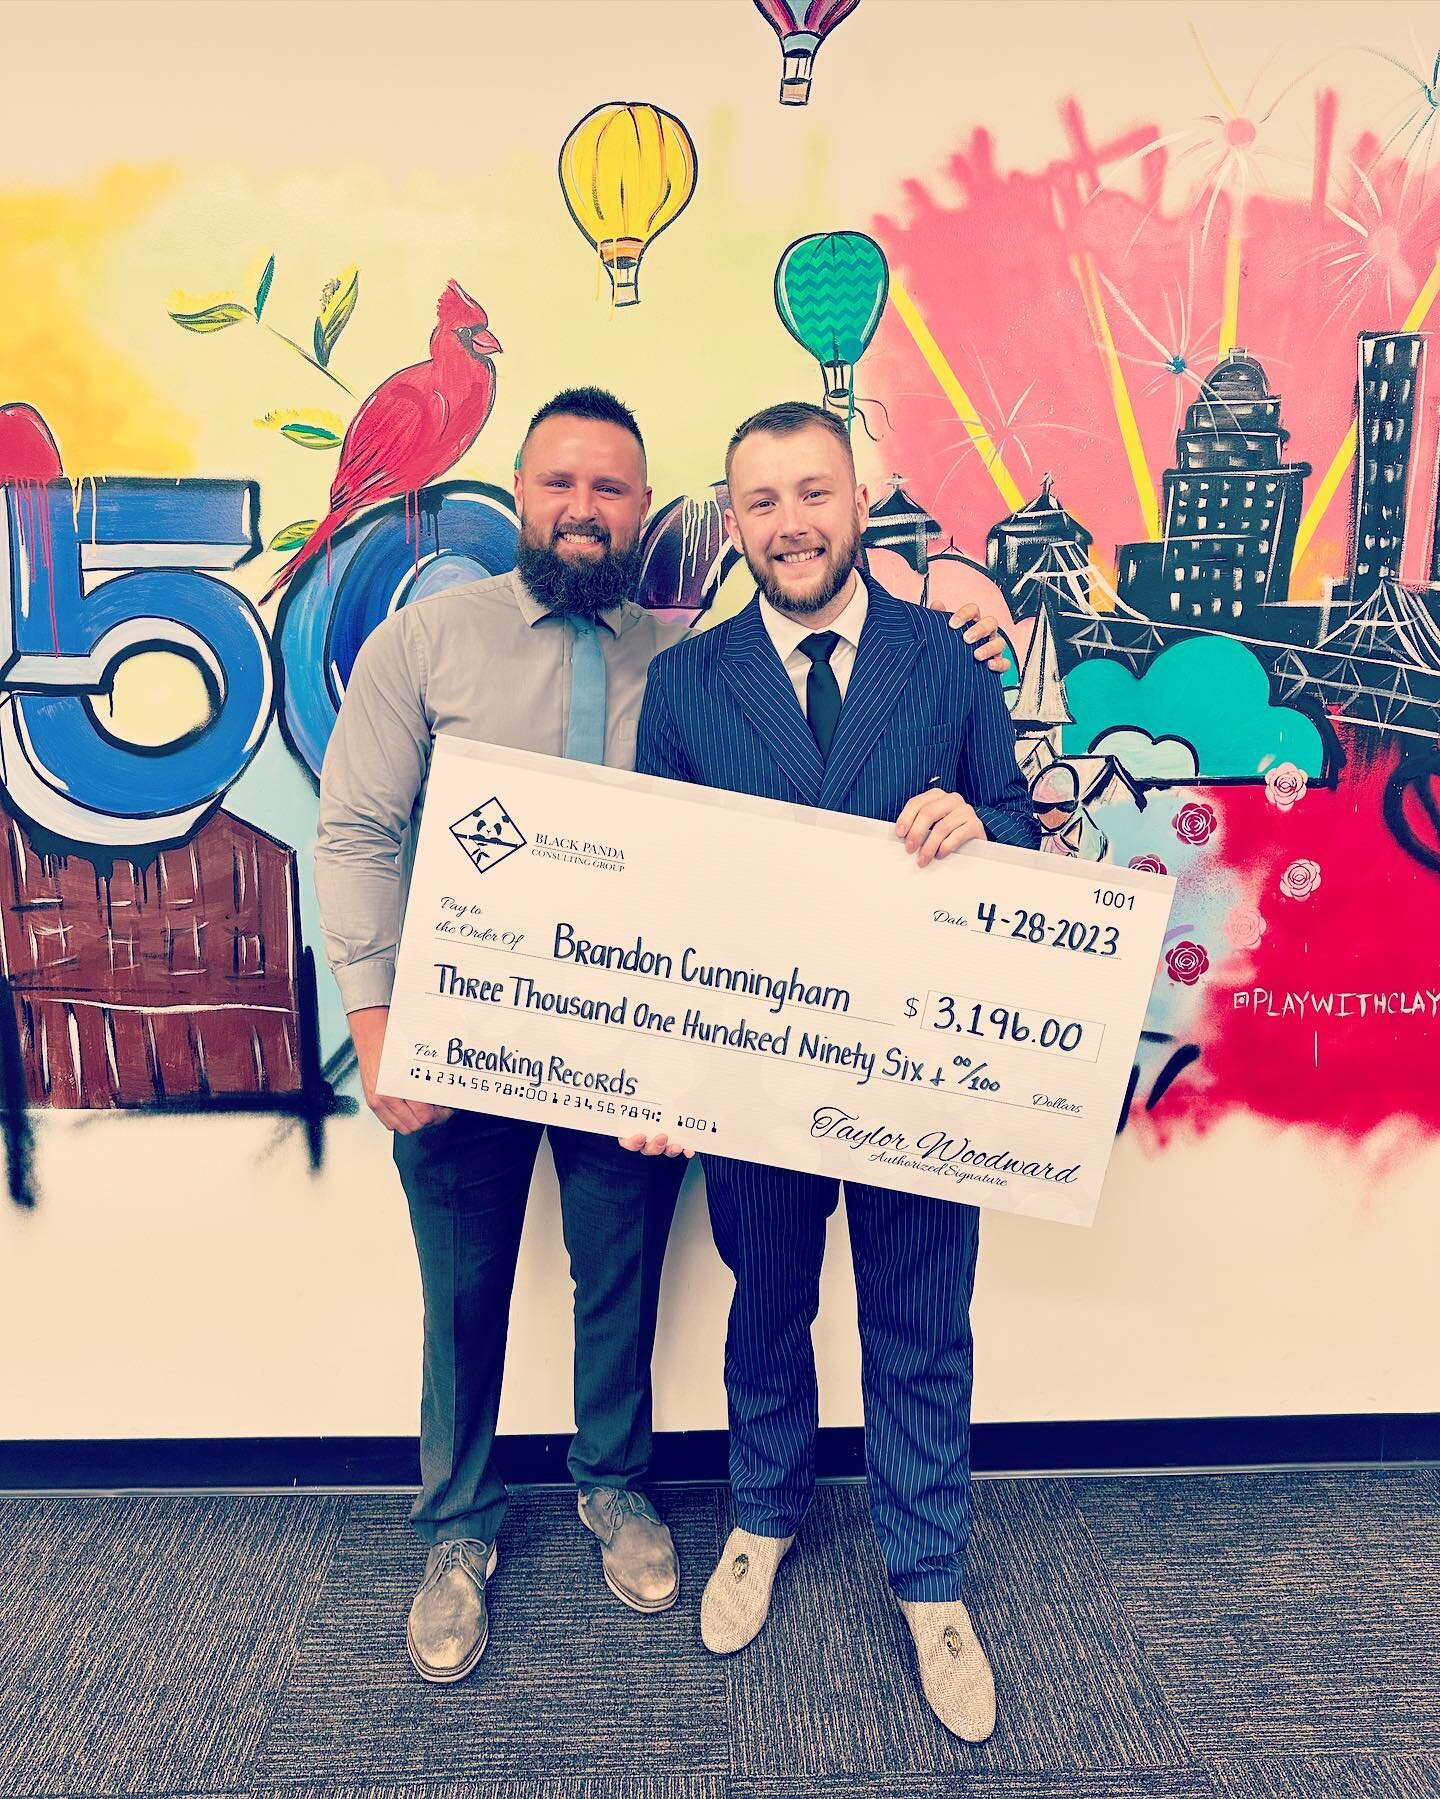 This is what focus and commitment looks like. Congratulations to Brandon for absolutely crushing his goals and breaking records! #Work #HardlyWork #BlackPanda #BigCheck #Commitment #Hustle